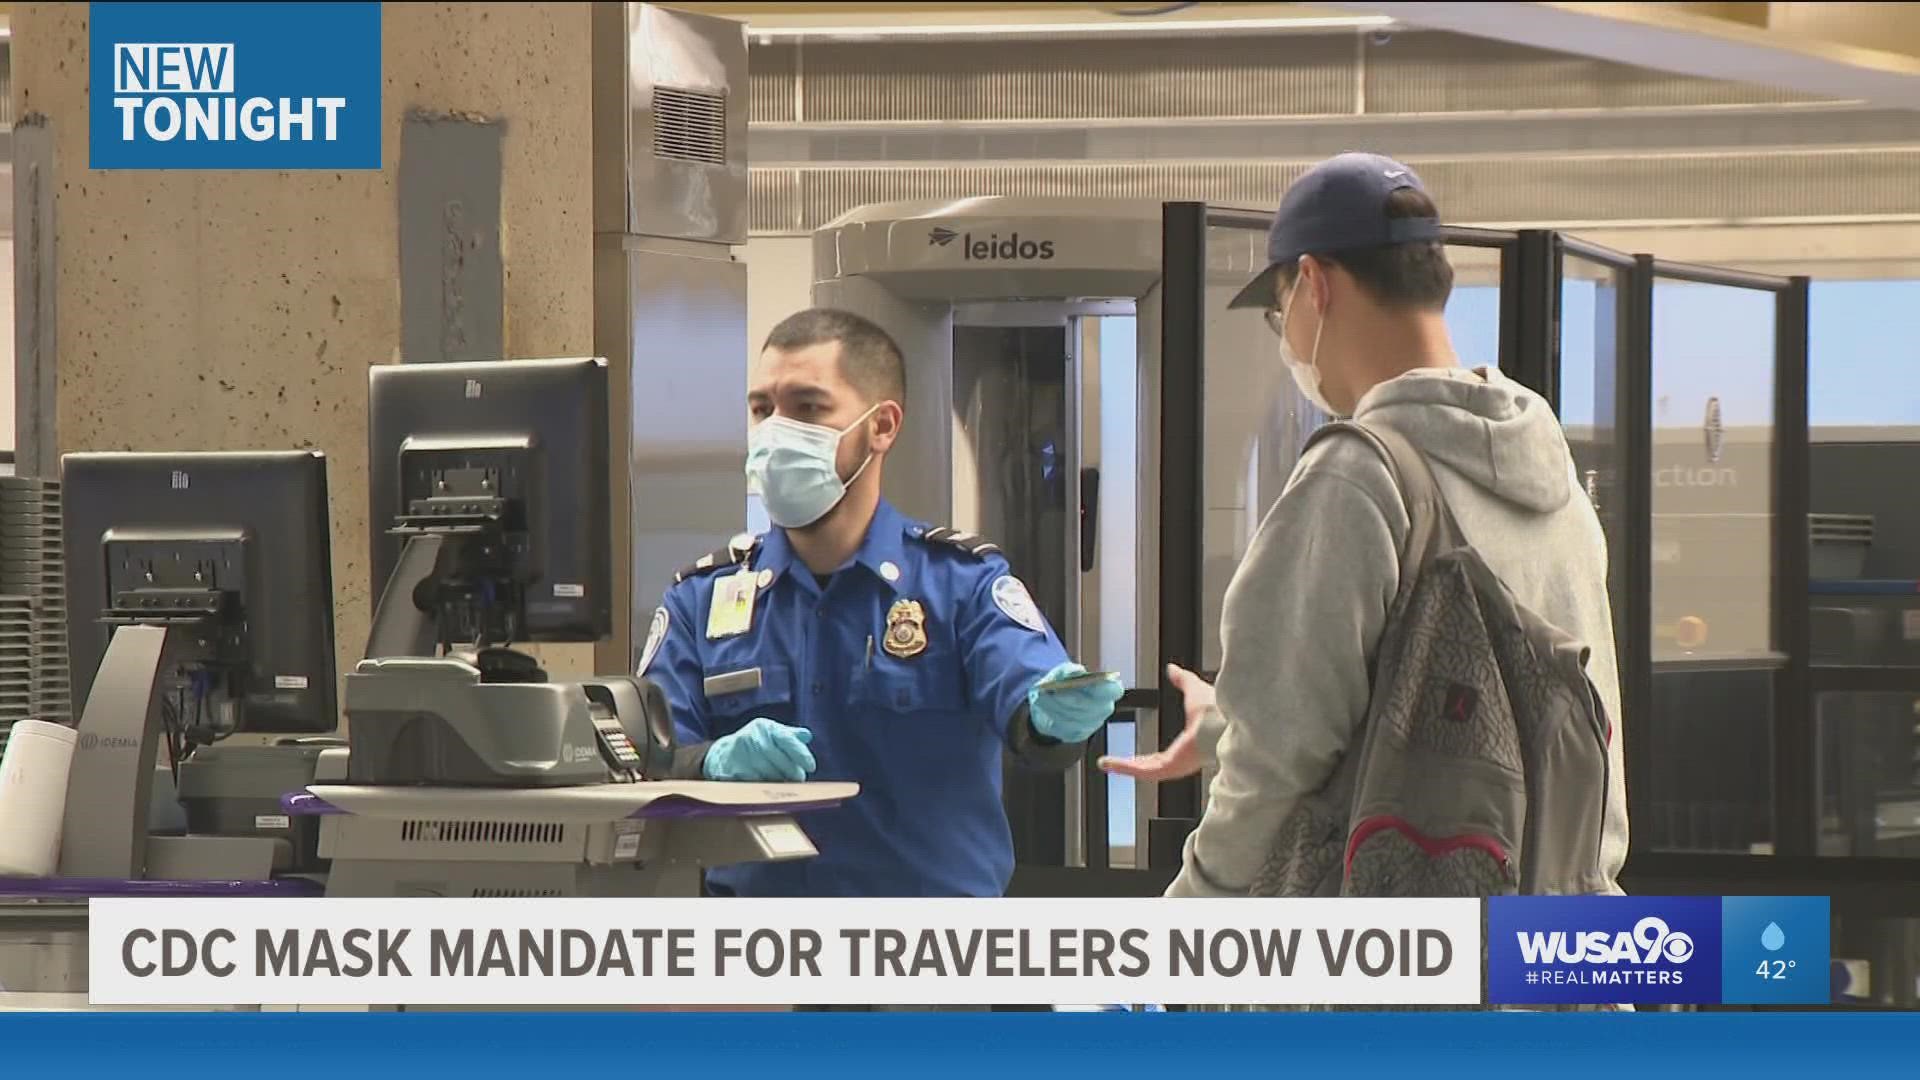 The Transportation Security Administration (TSA) will no longer enforce the mask mandate on planes, according to major U.S. airlines.